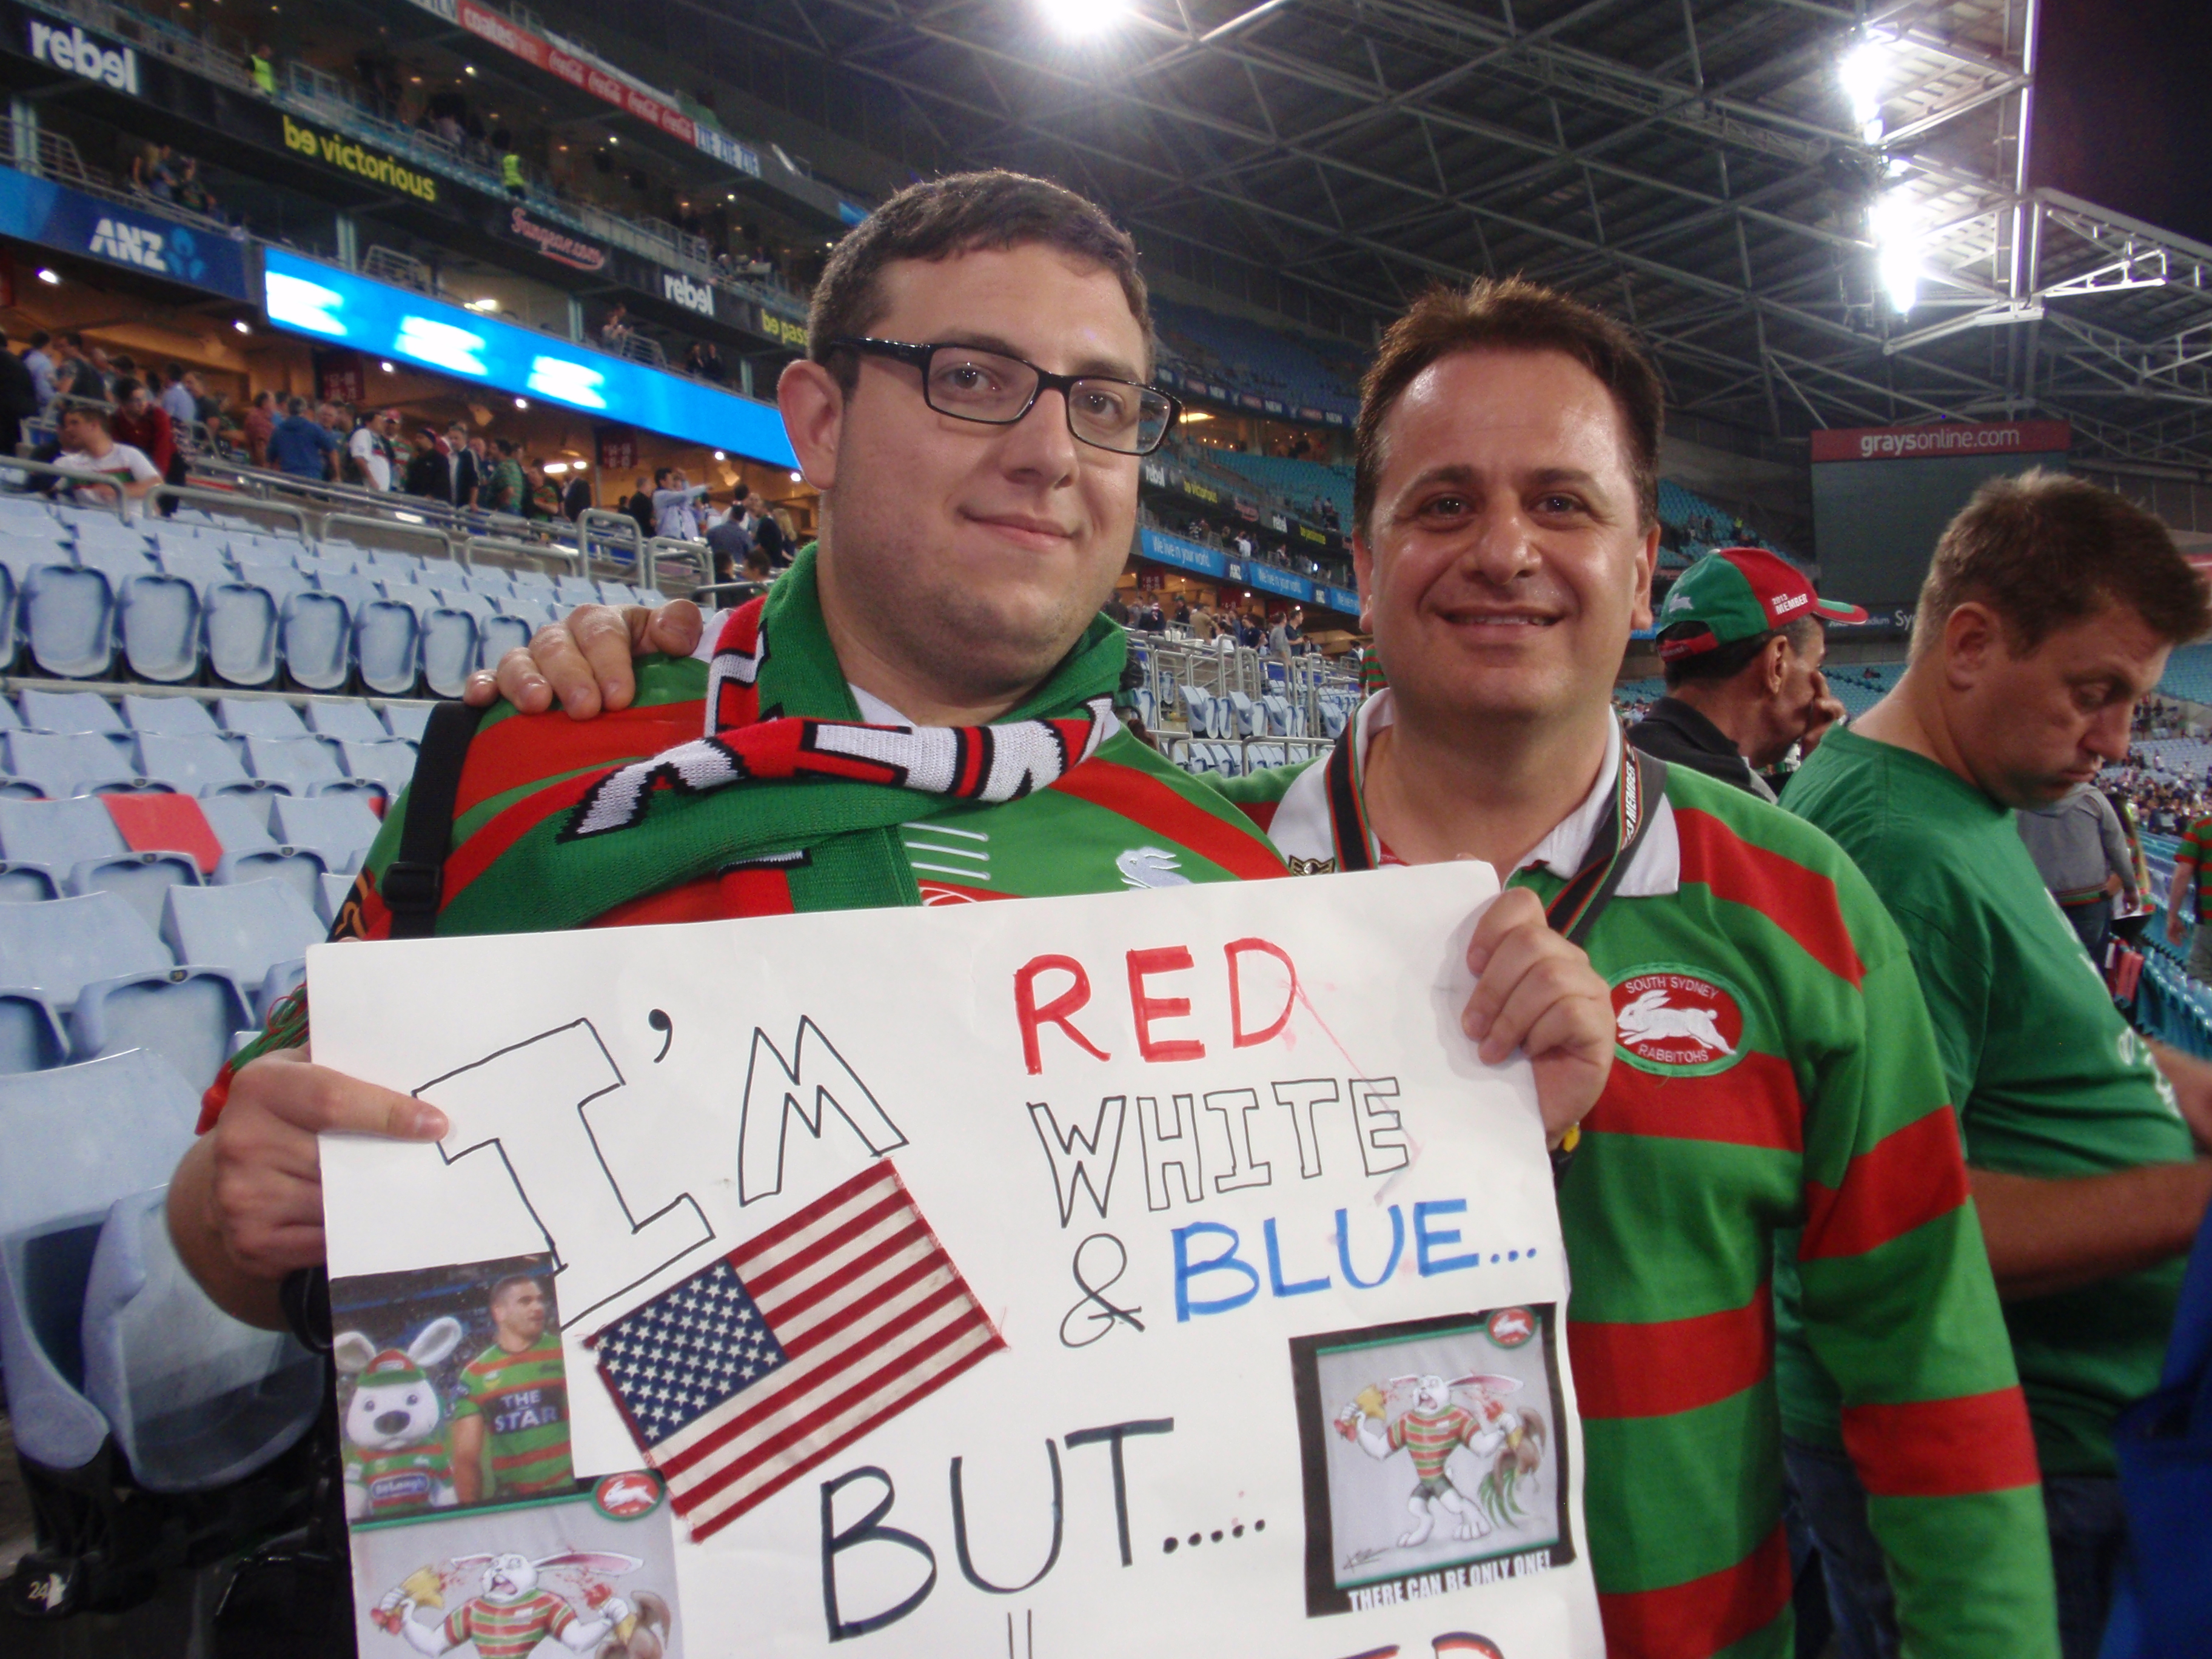 "I'm Red, White, and Blue, BUT...  I Bleed Red & Green for South Sydney!"